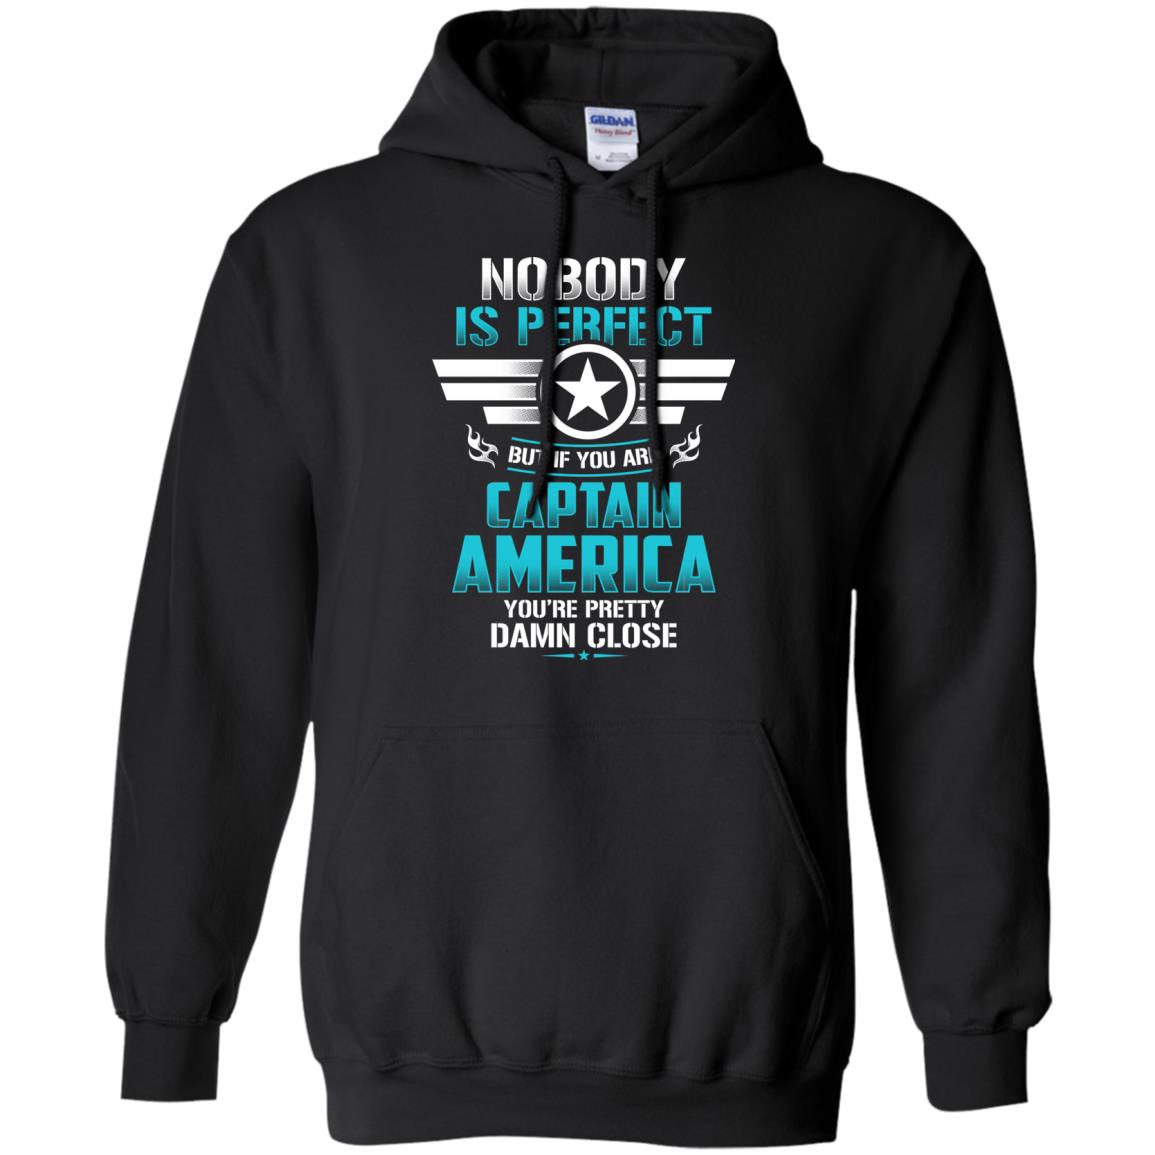 Nobody Is Perfect But If You Are Captain America You_re Pretty Damn Close Movie Fan T-shirtG185 Gildan Pullover Hoodie 8 oz.